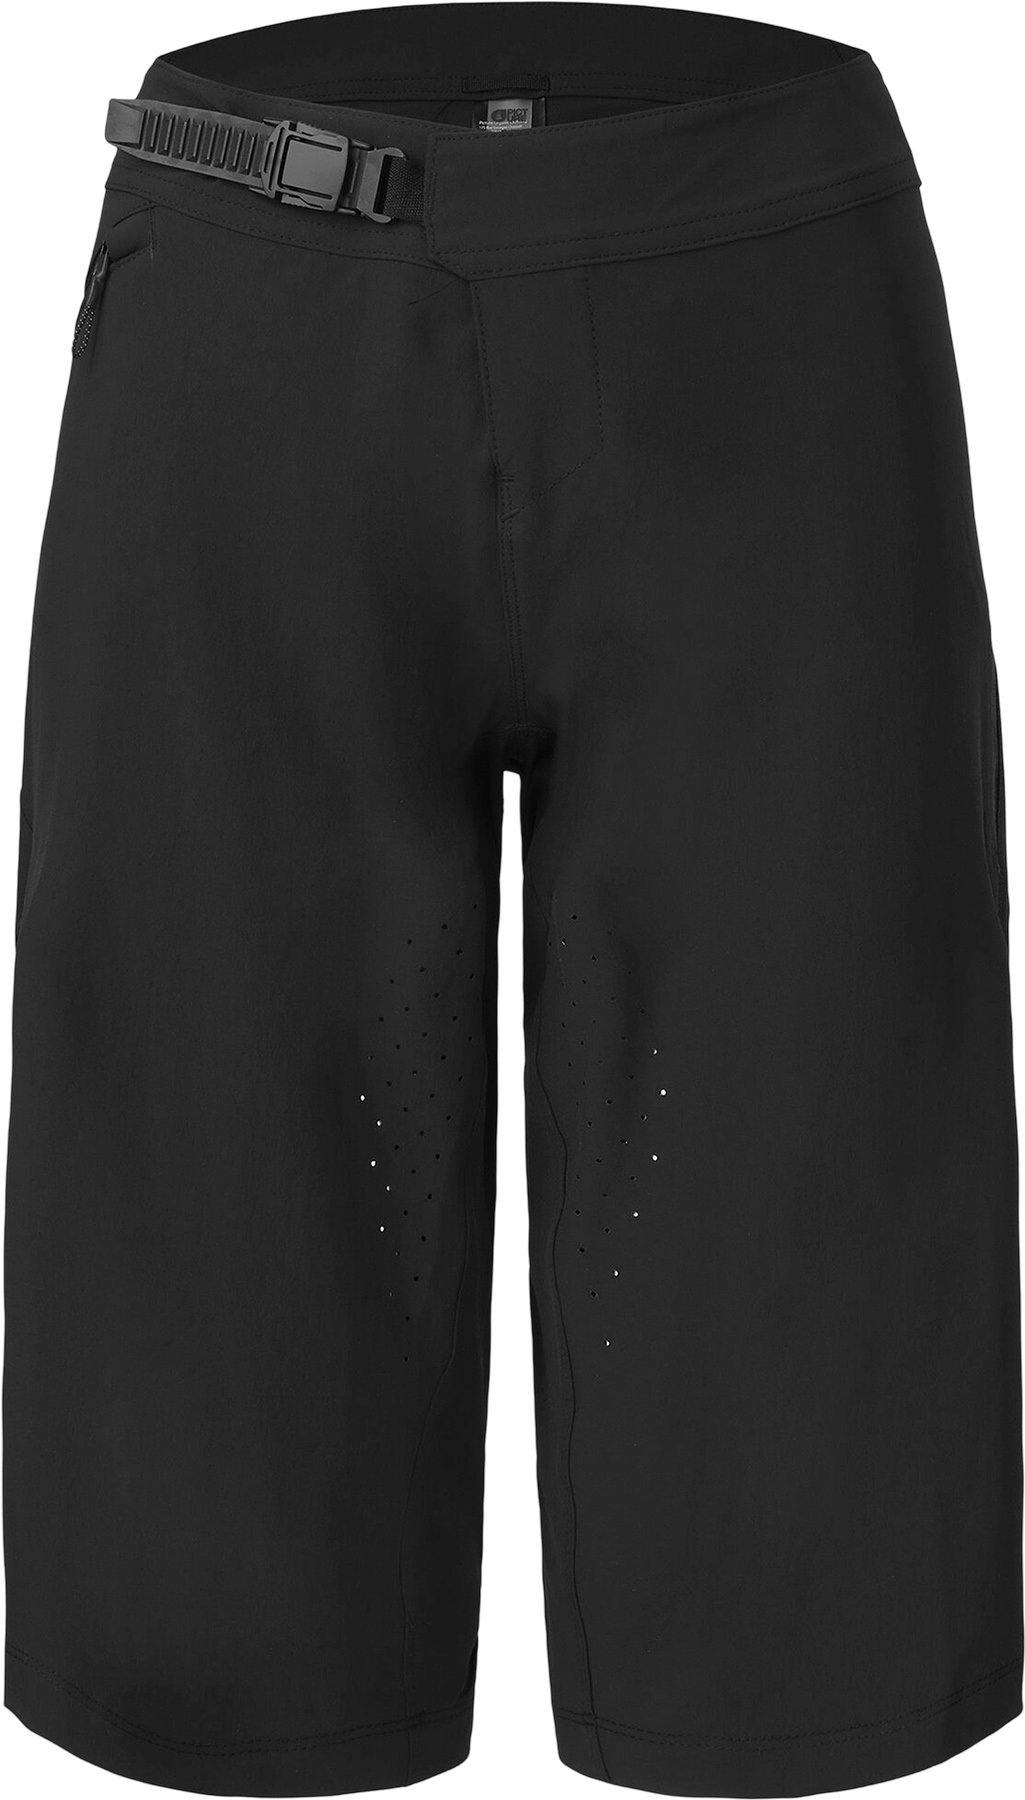 Product image for Vellir L Stretch Shorts - Women's